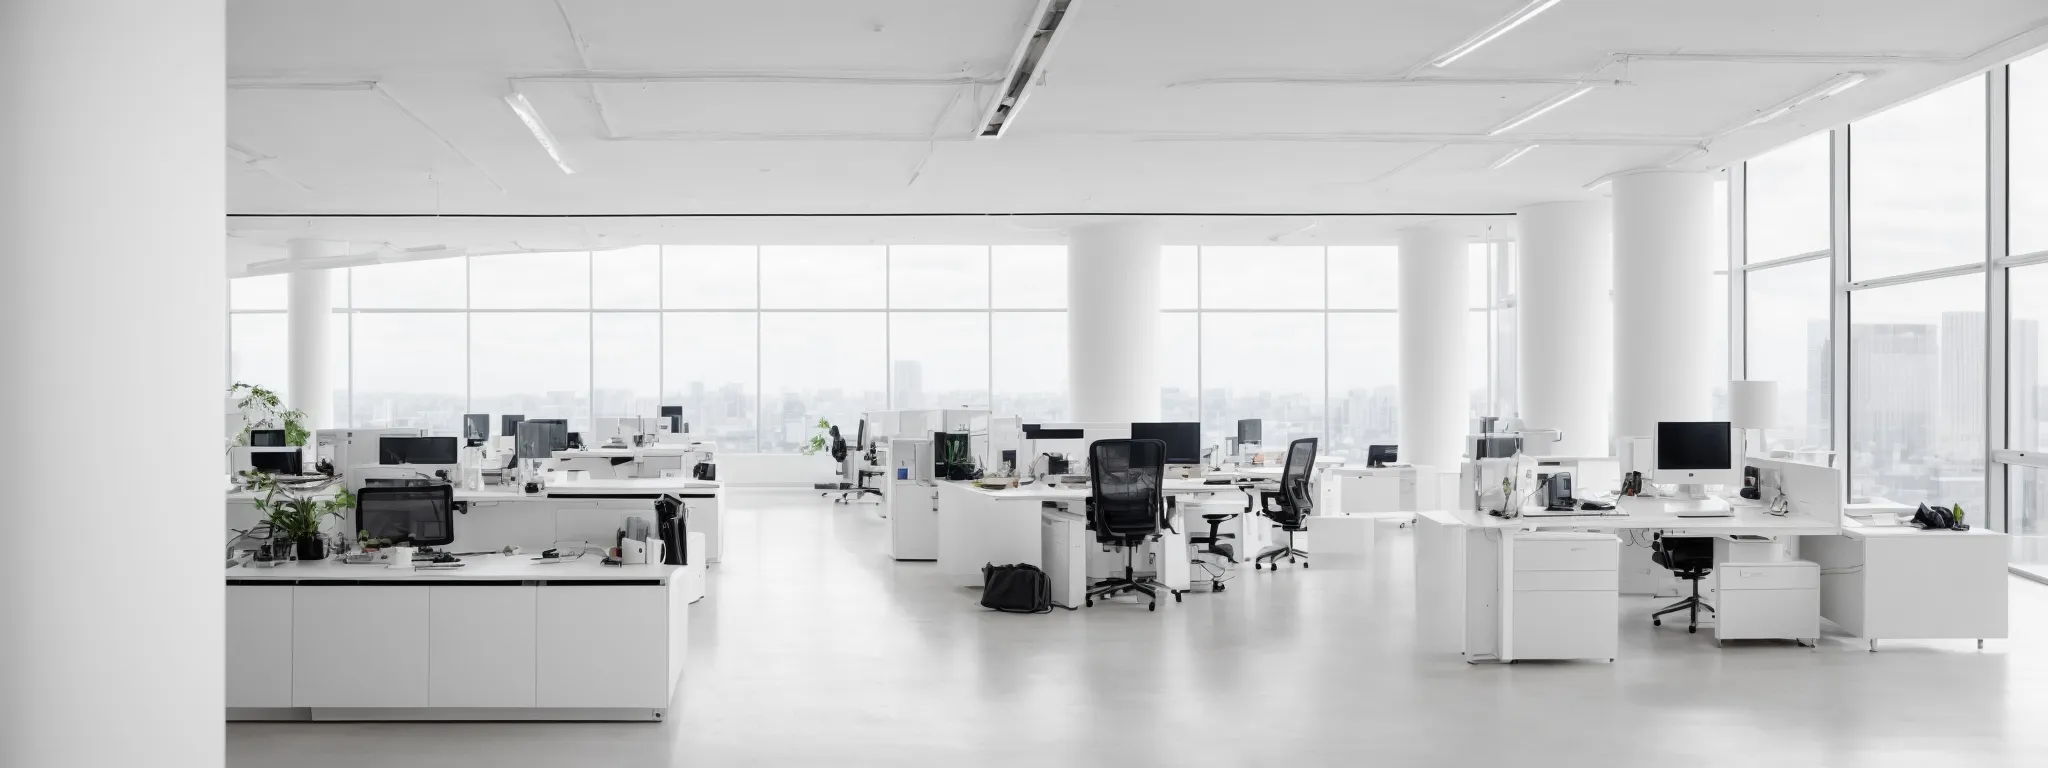 a panoramic view of a sleek, modern office with minimalist design and ample white space, highlighting efficiency and focus.